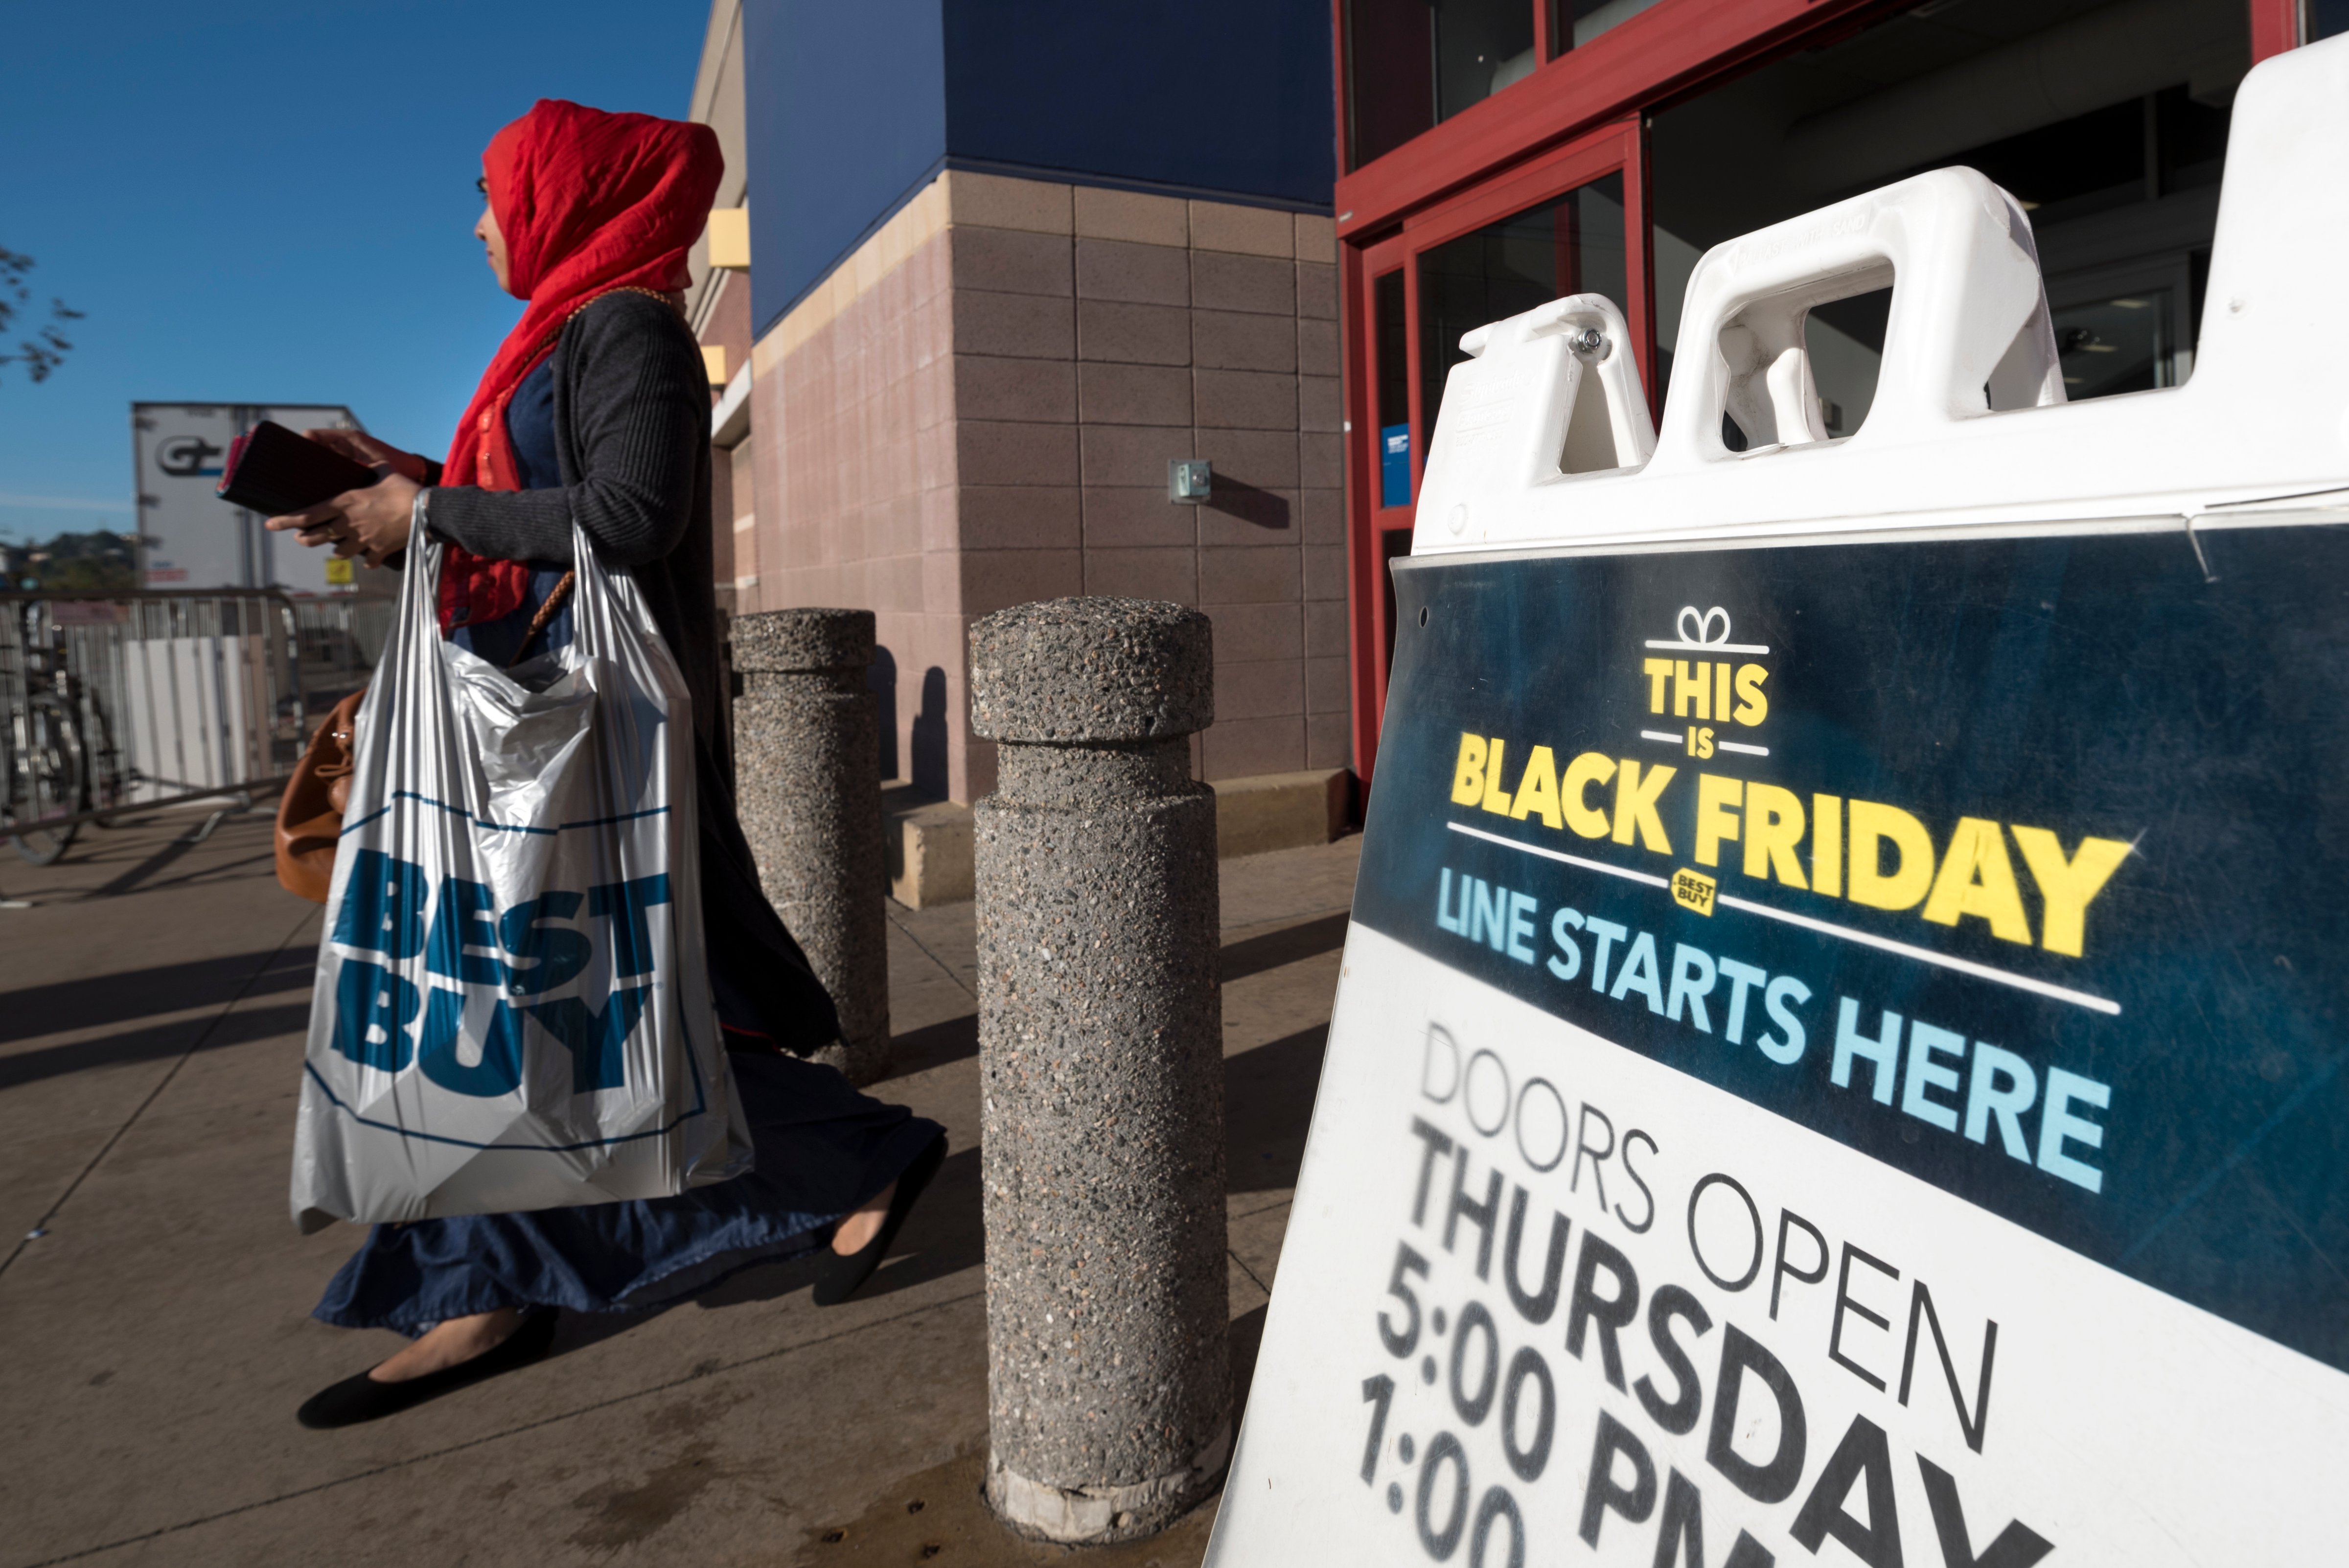 Best Buy will be open for Thanksgiving Day and Black Friday. (Photo by Ronen Tivony/NurPhoto via Getty Images) (NurPhoto—NurPhoto via Getty Images)